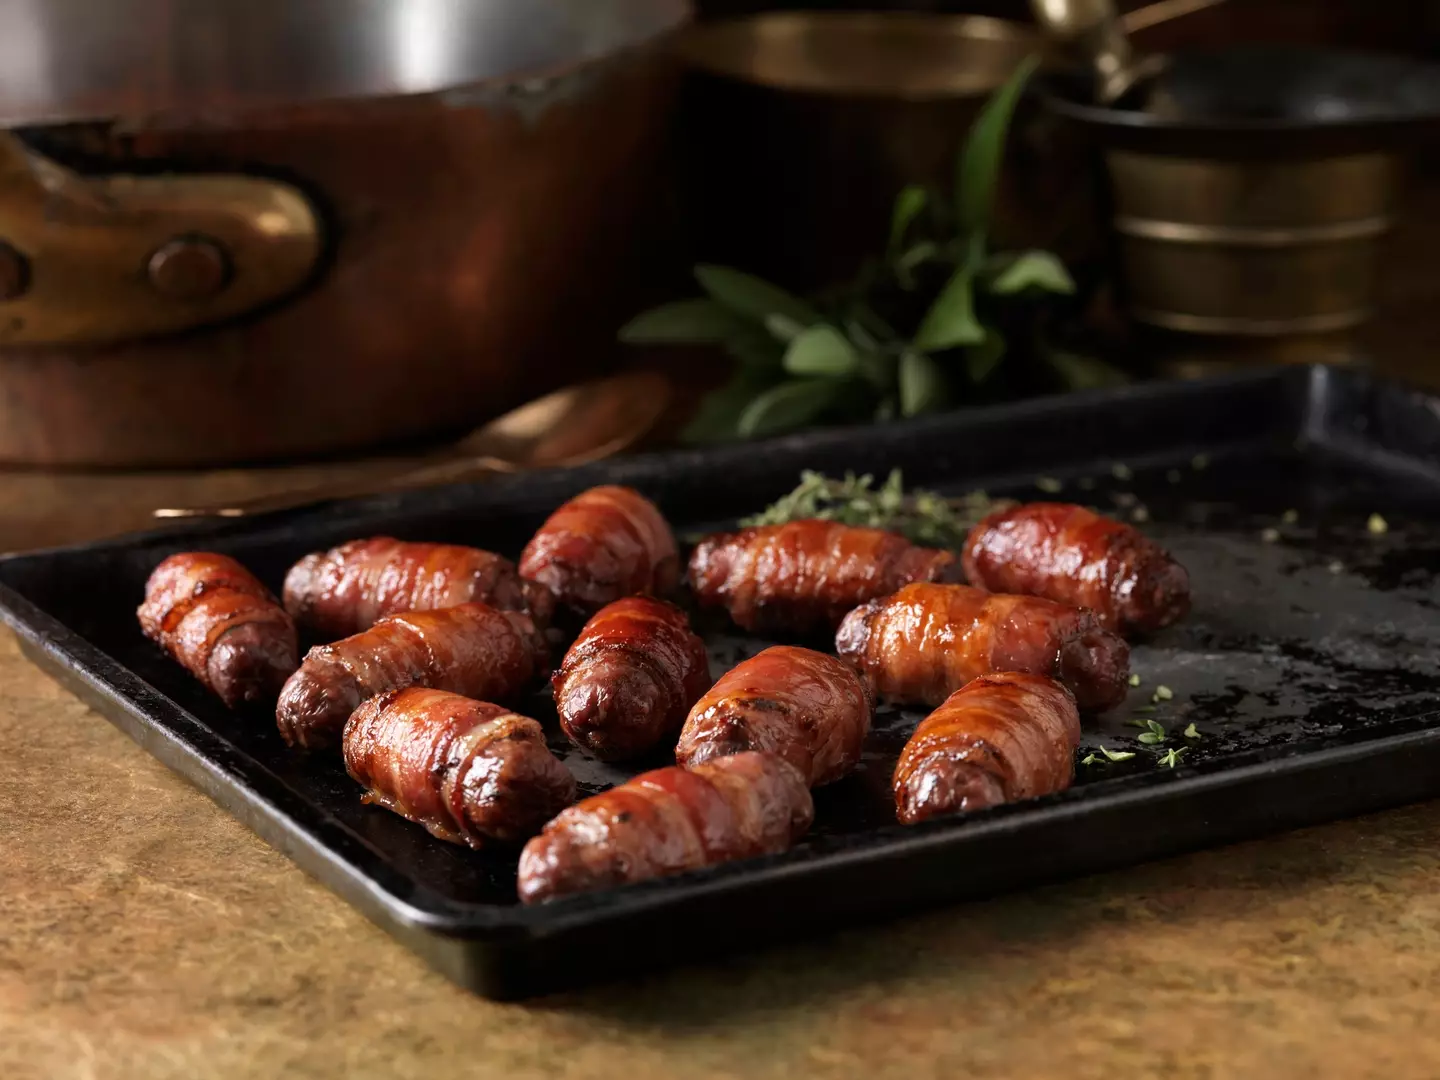 Maybe stick to the oven for your pigs in blankets this year?